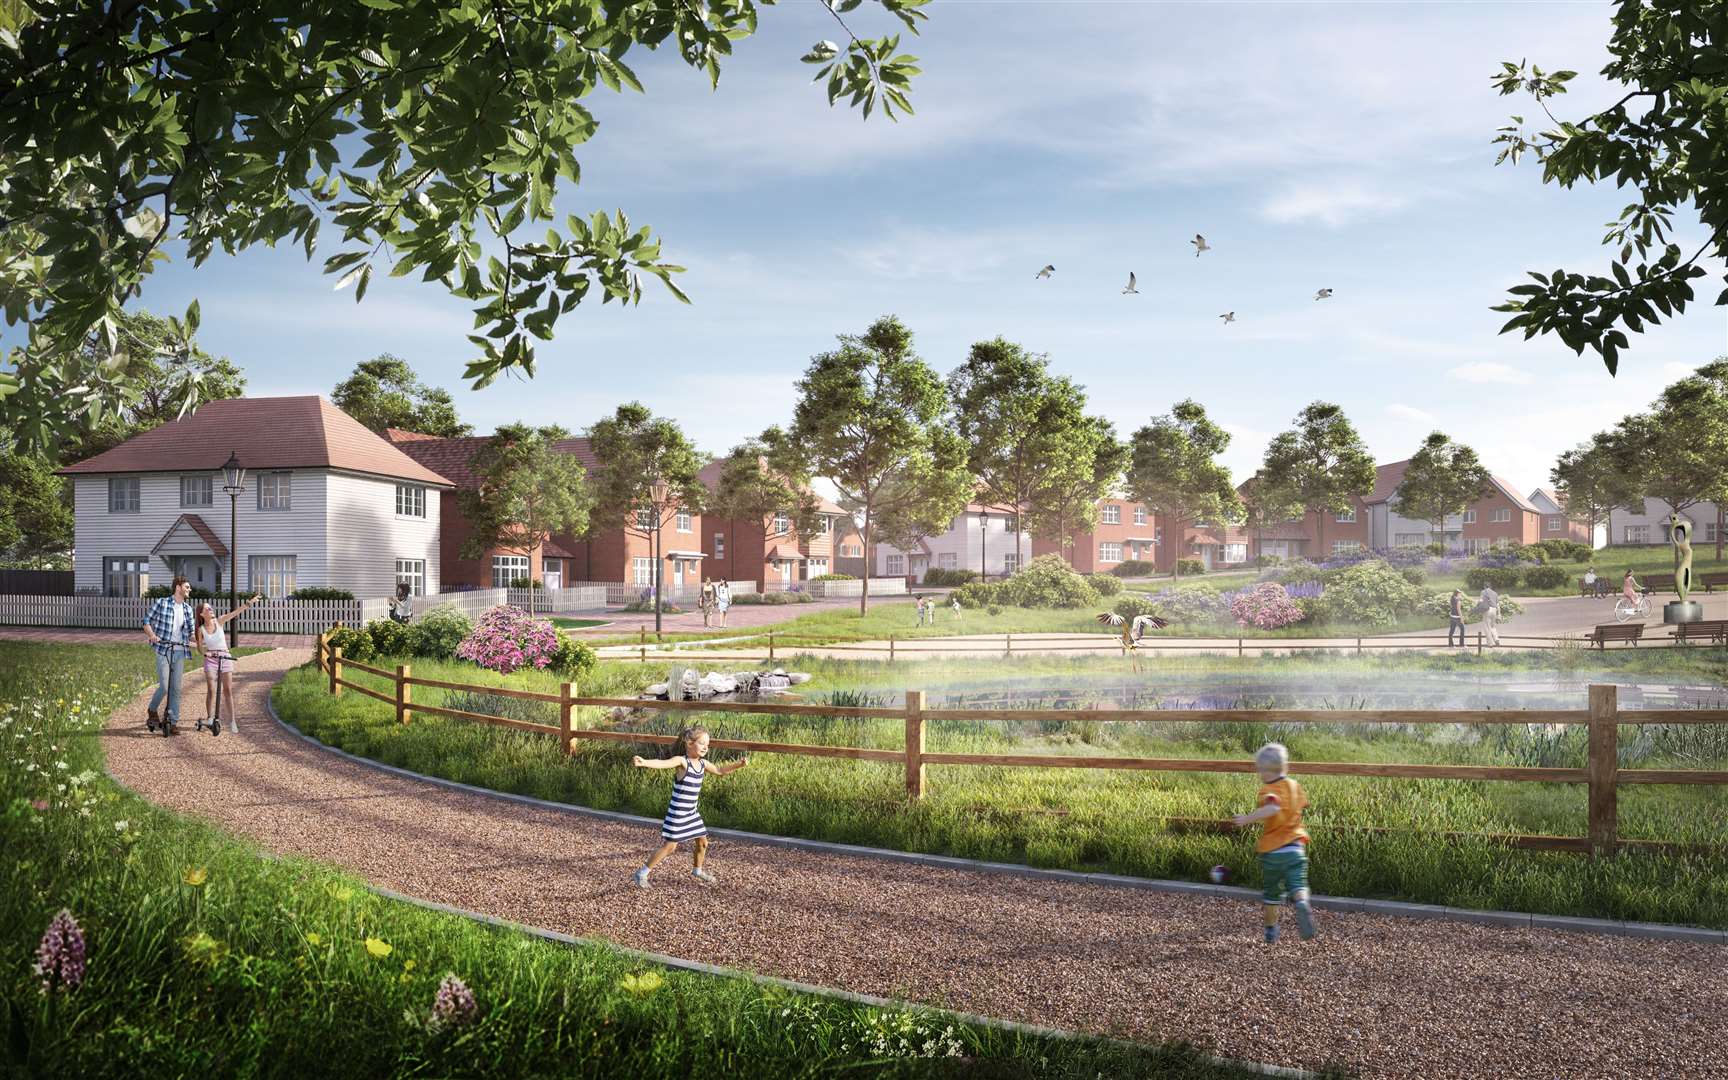 This image shows what Conningbrook Park could look like